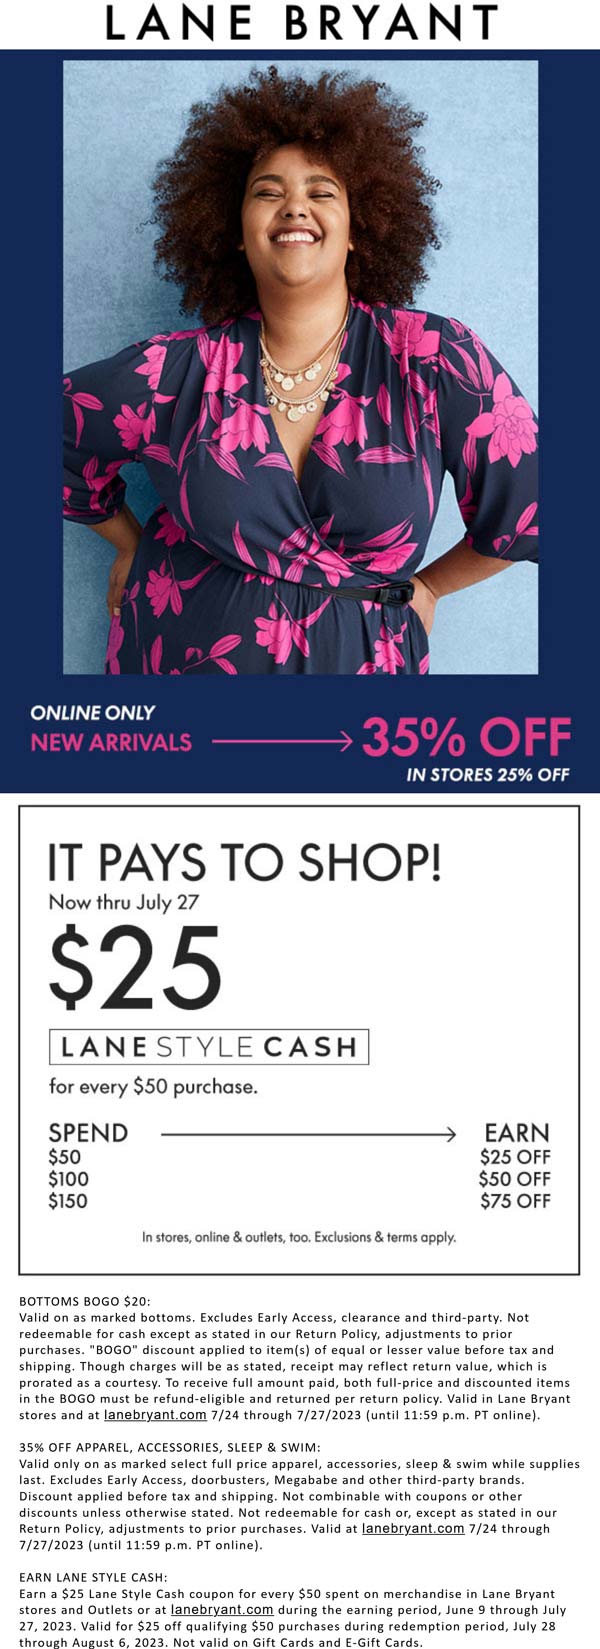 Lane Bryant stores Coupon  25% off new arrivals today at Lane Bryant, or 35% online #lanebryant 